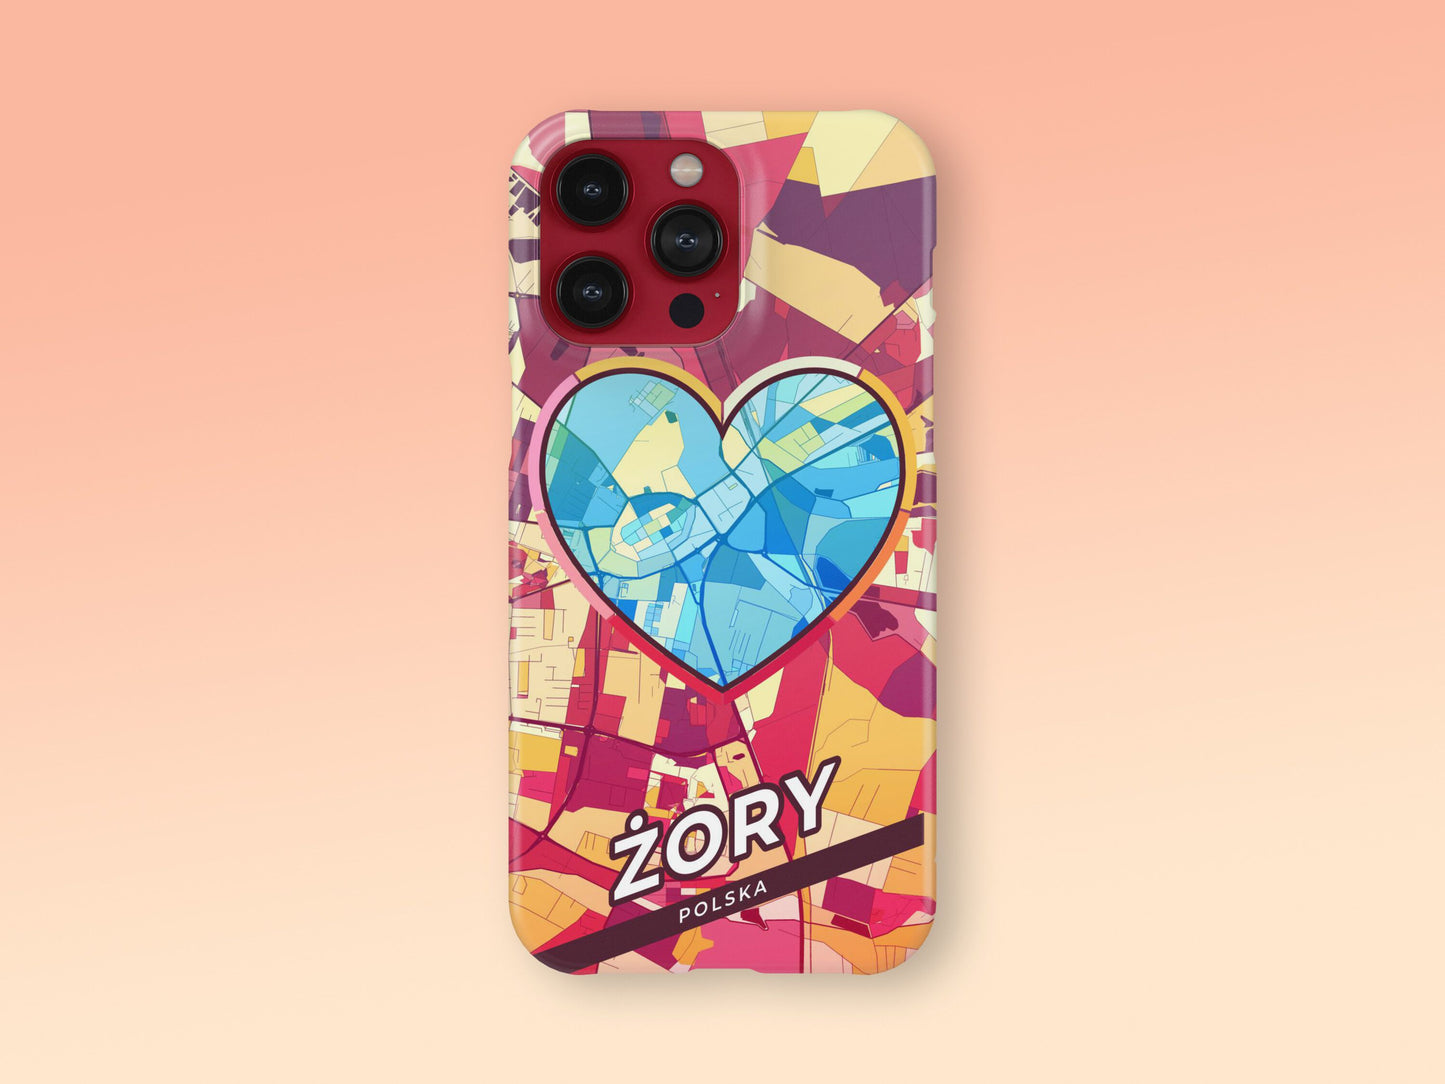 Żory Poland slim phone case with colorful icon 2